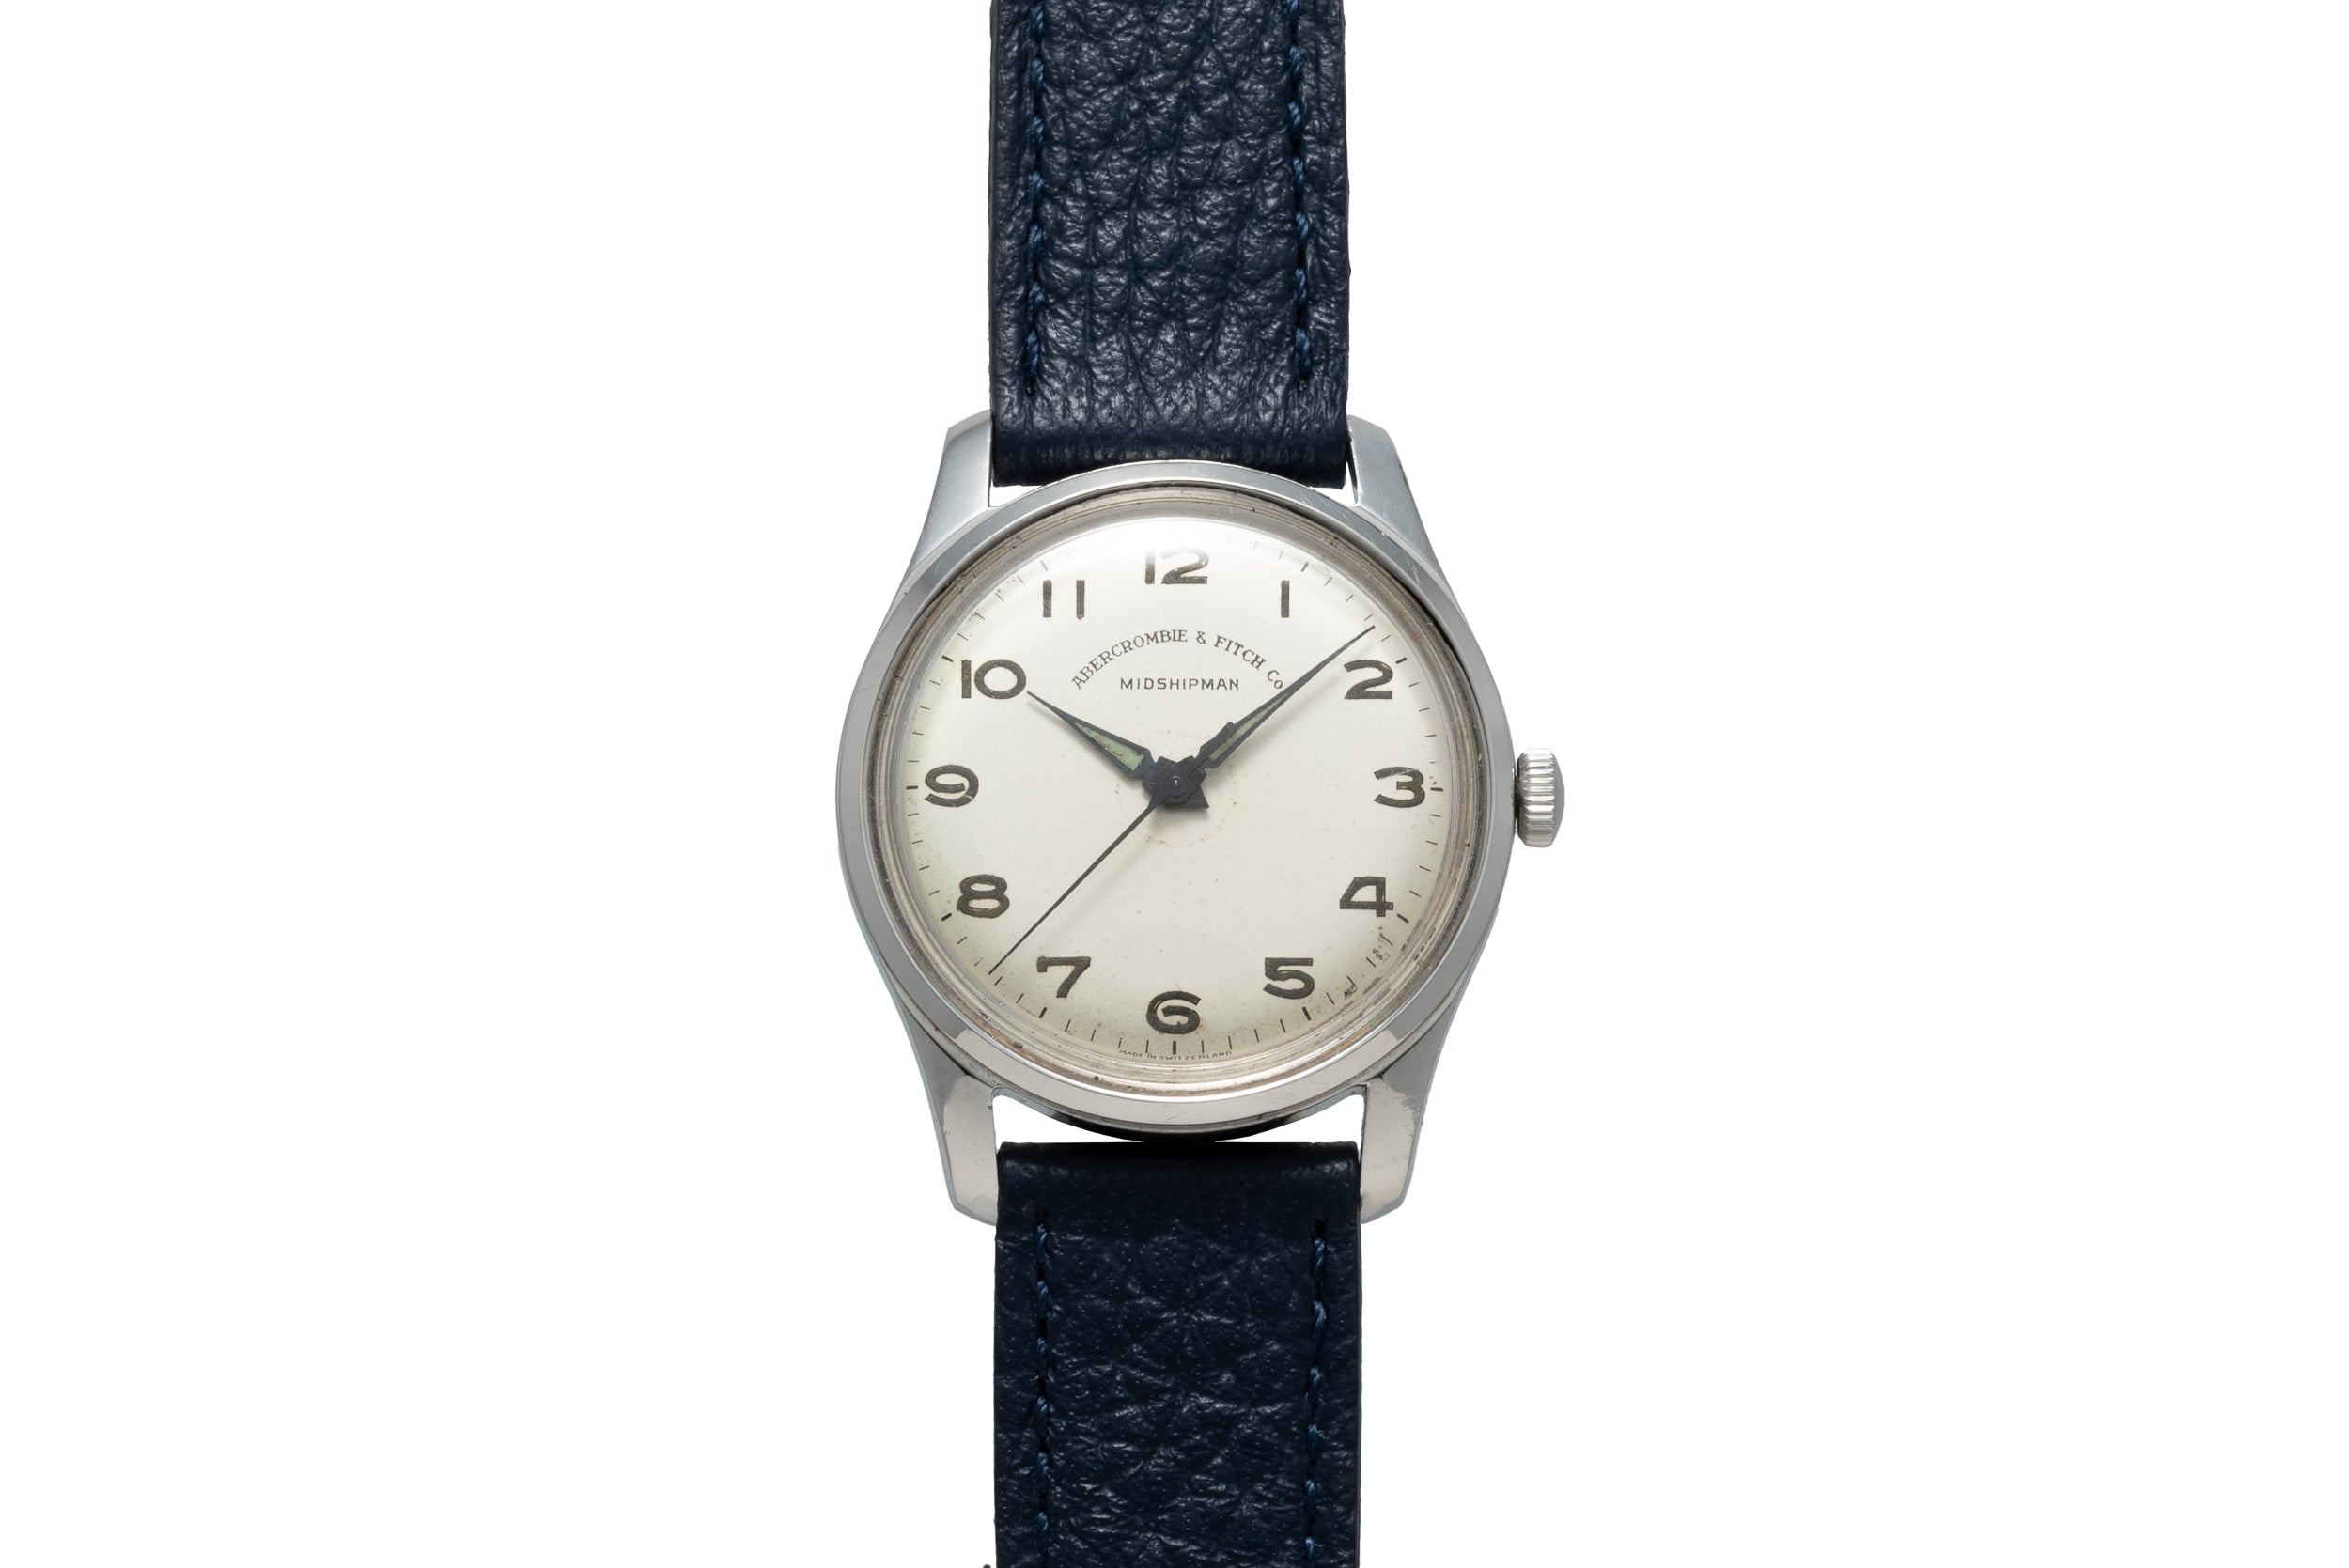 Abercrombie & Fitch Midshipman – Analog:Shift